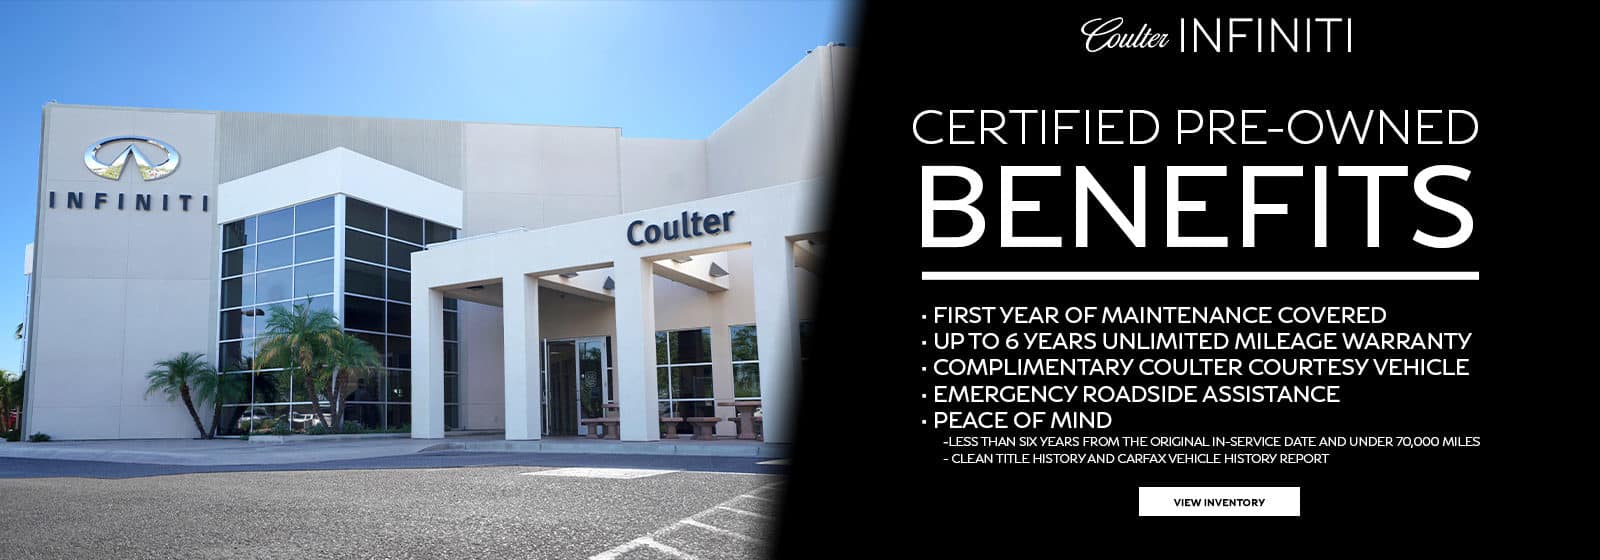 Certified Pre-Owned Benefits